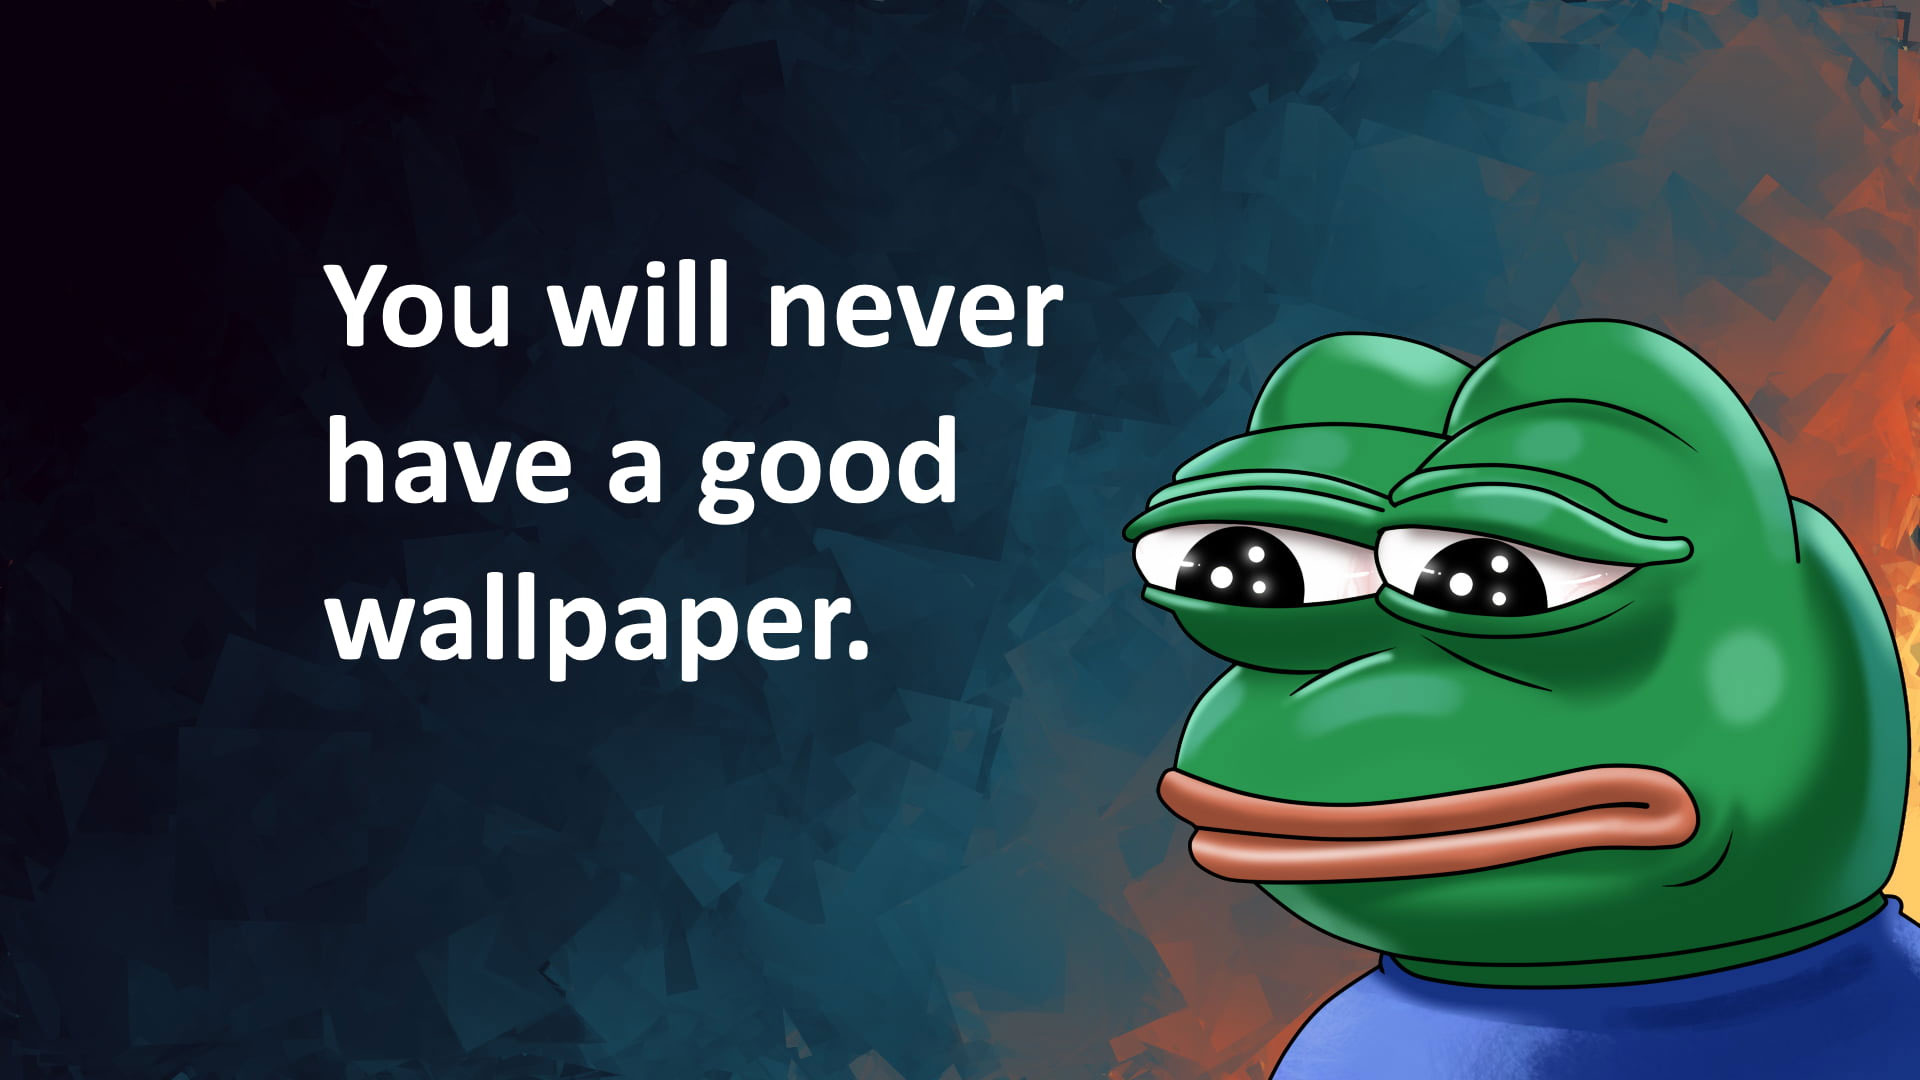 Green frog with you will never have a good wallpaper, FeelsBadMan